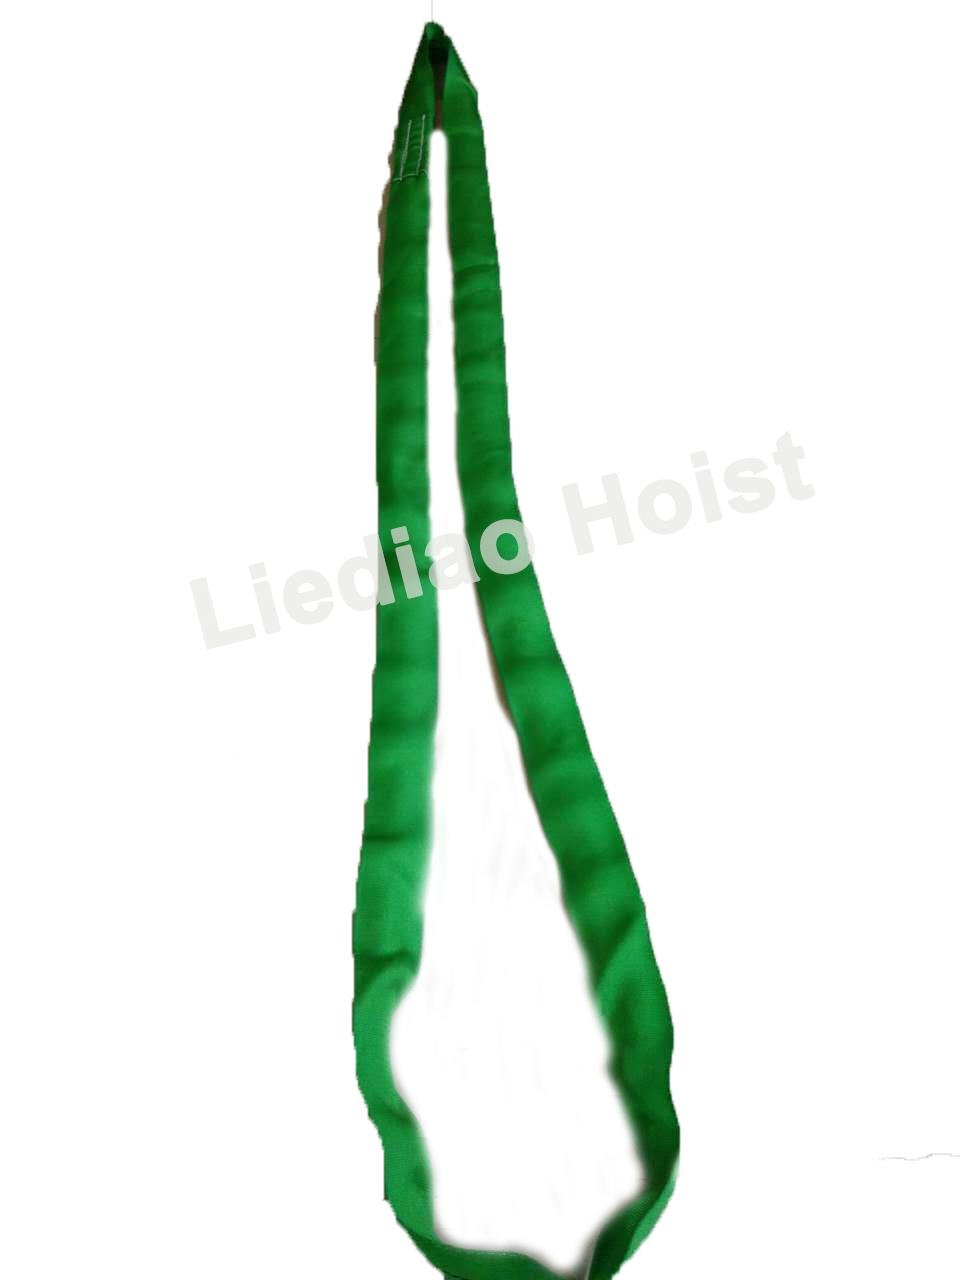 Round Endless Cargo Webbing Sling Polyester Soft Lifting Sling 2